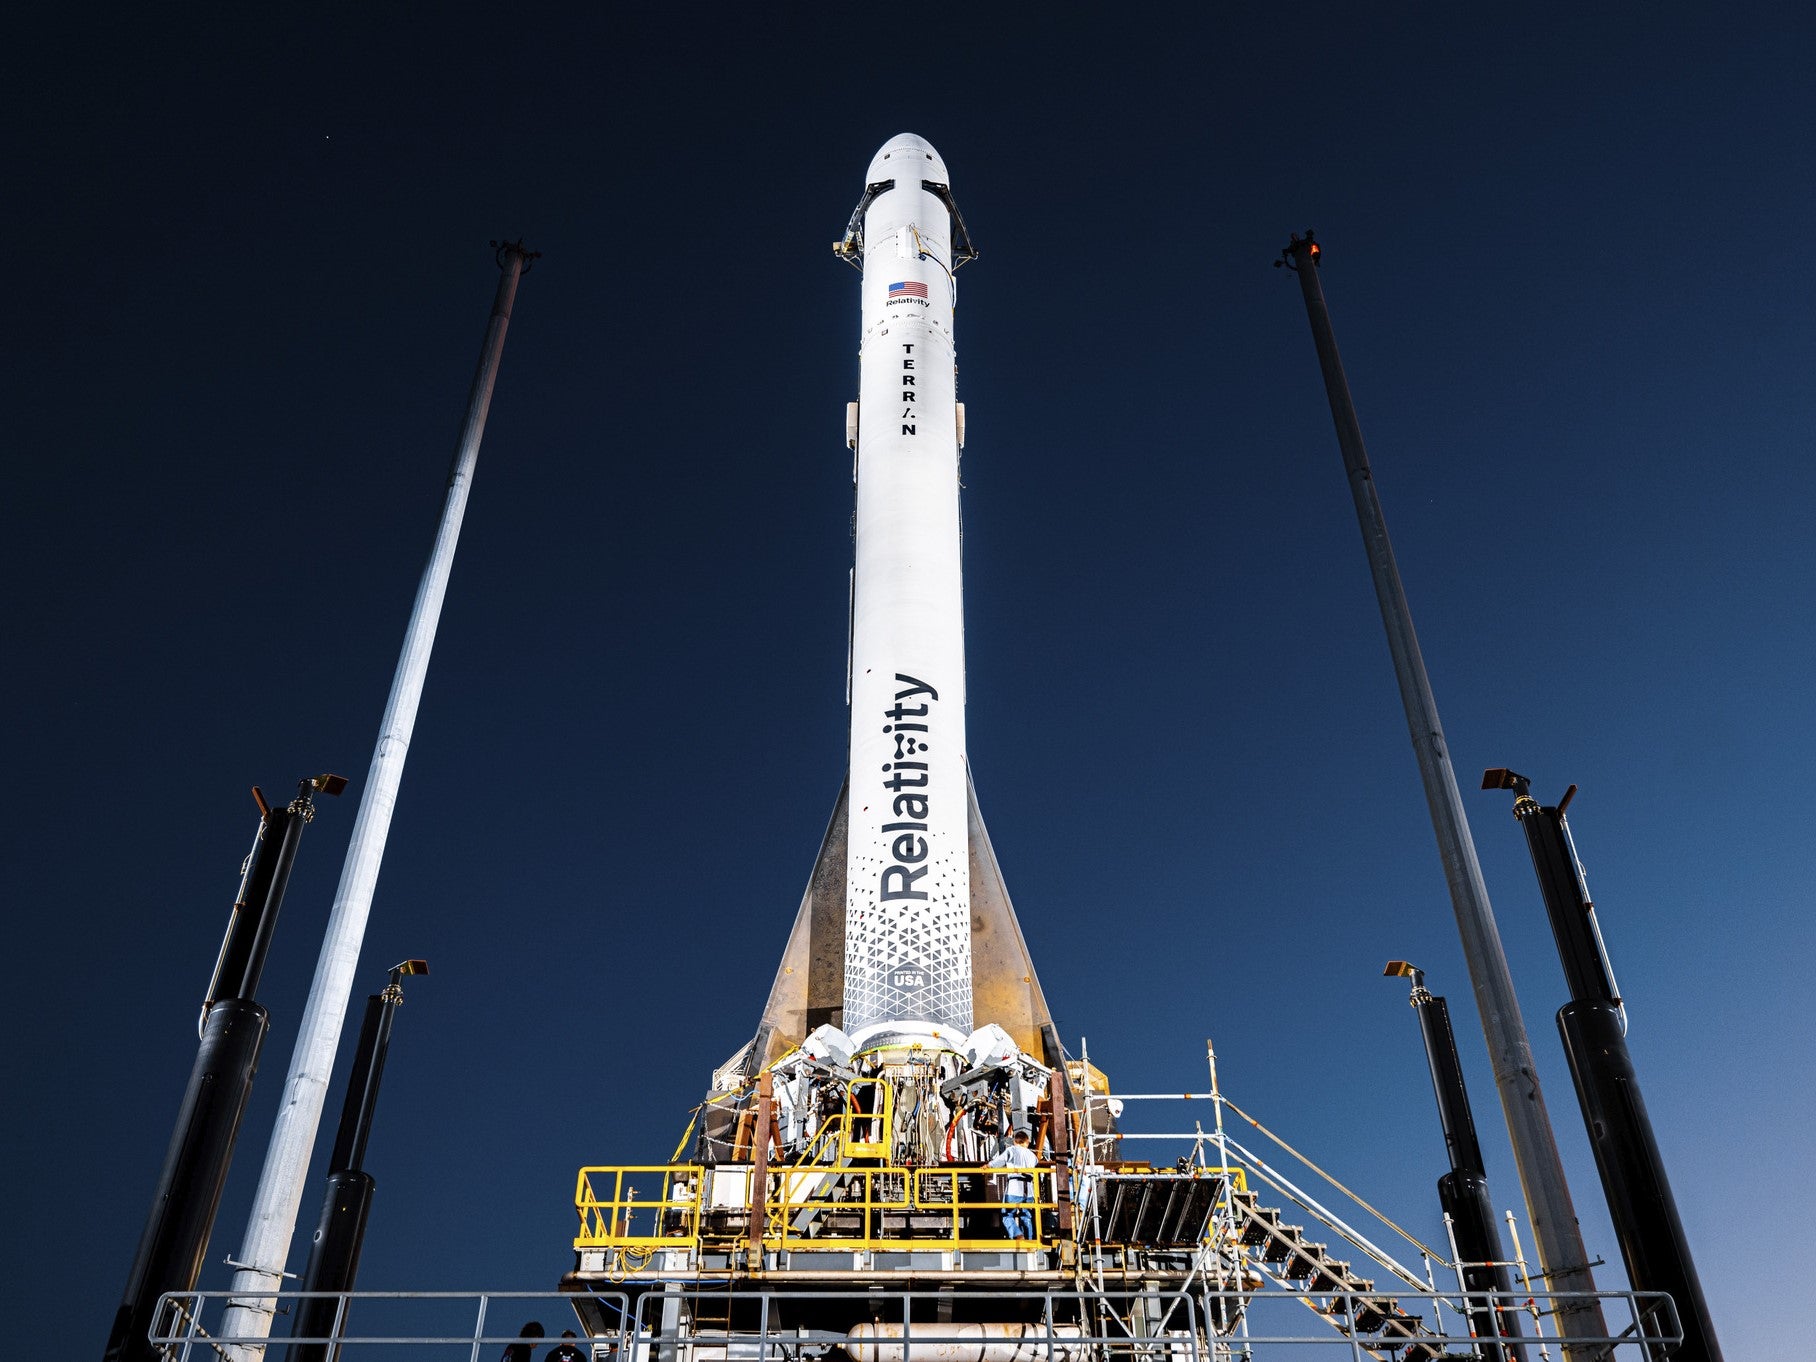 Could a Rocket Launch Really Become 'Green' and Sustainable?